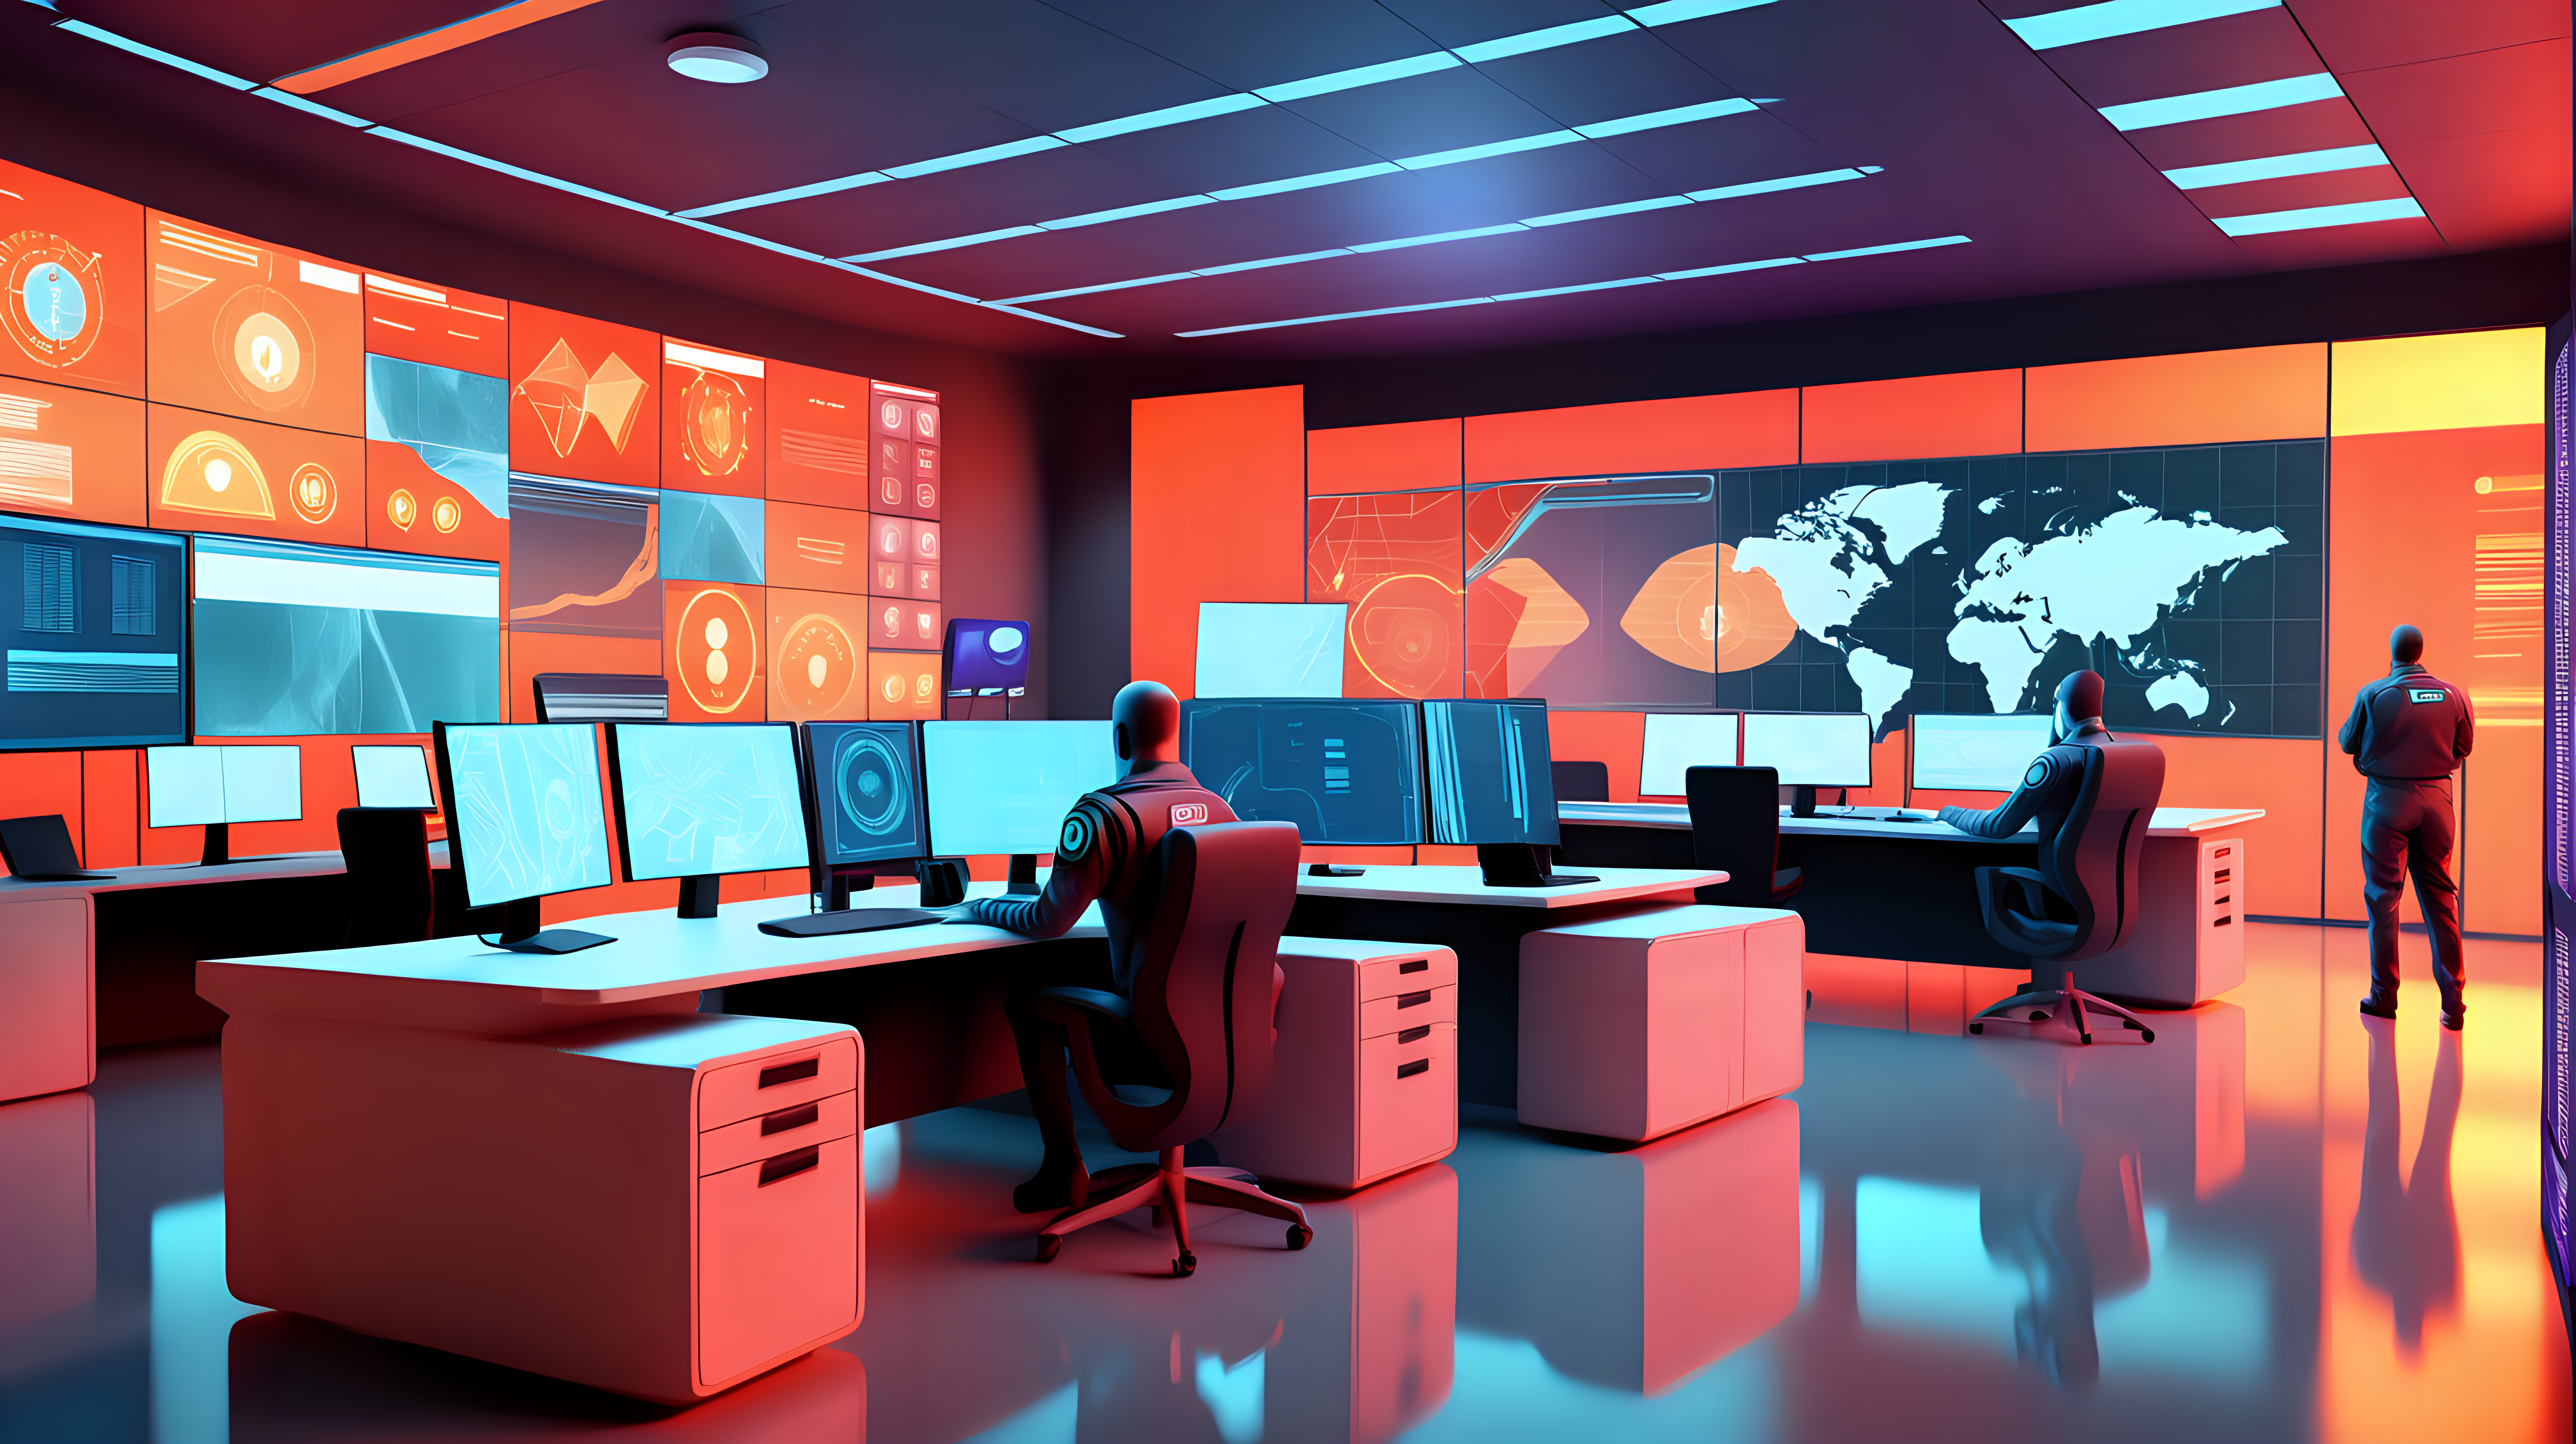 security operations center from the future with vivid